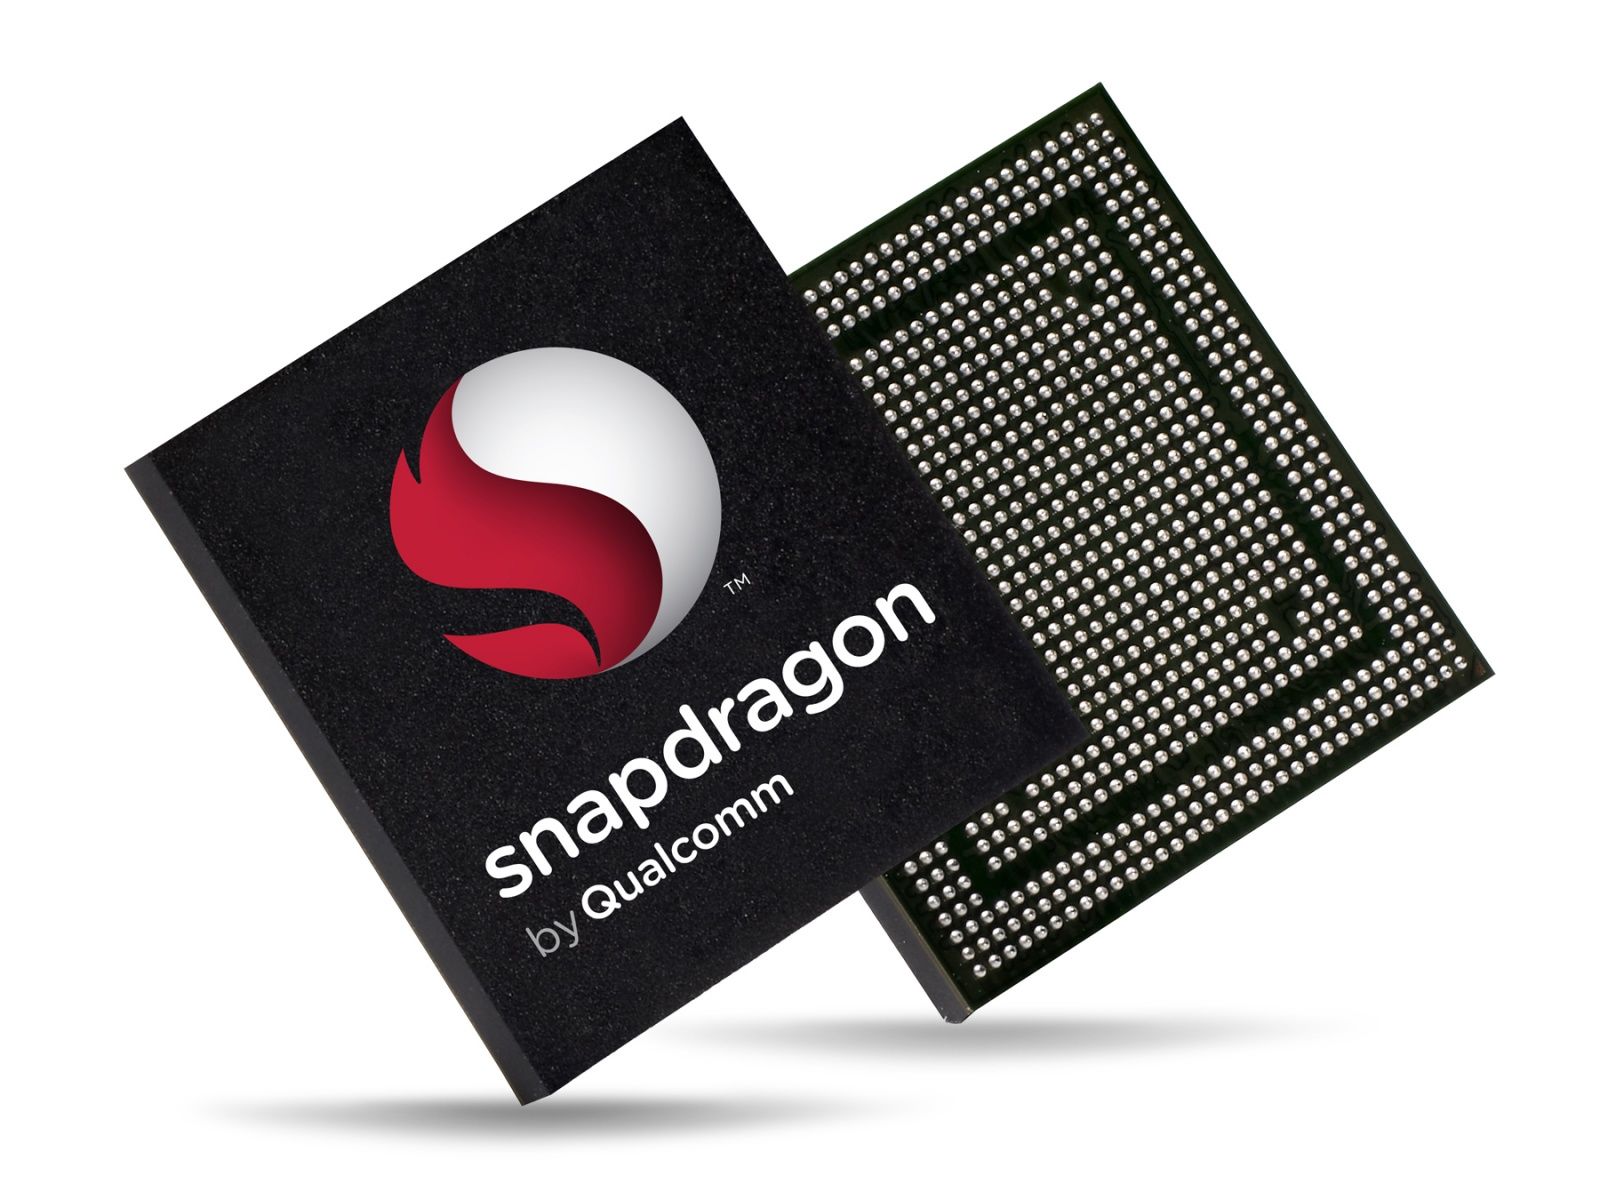 Qualcomm Snapdragon 810 SoC Supports 450 Mbps LTE